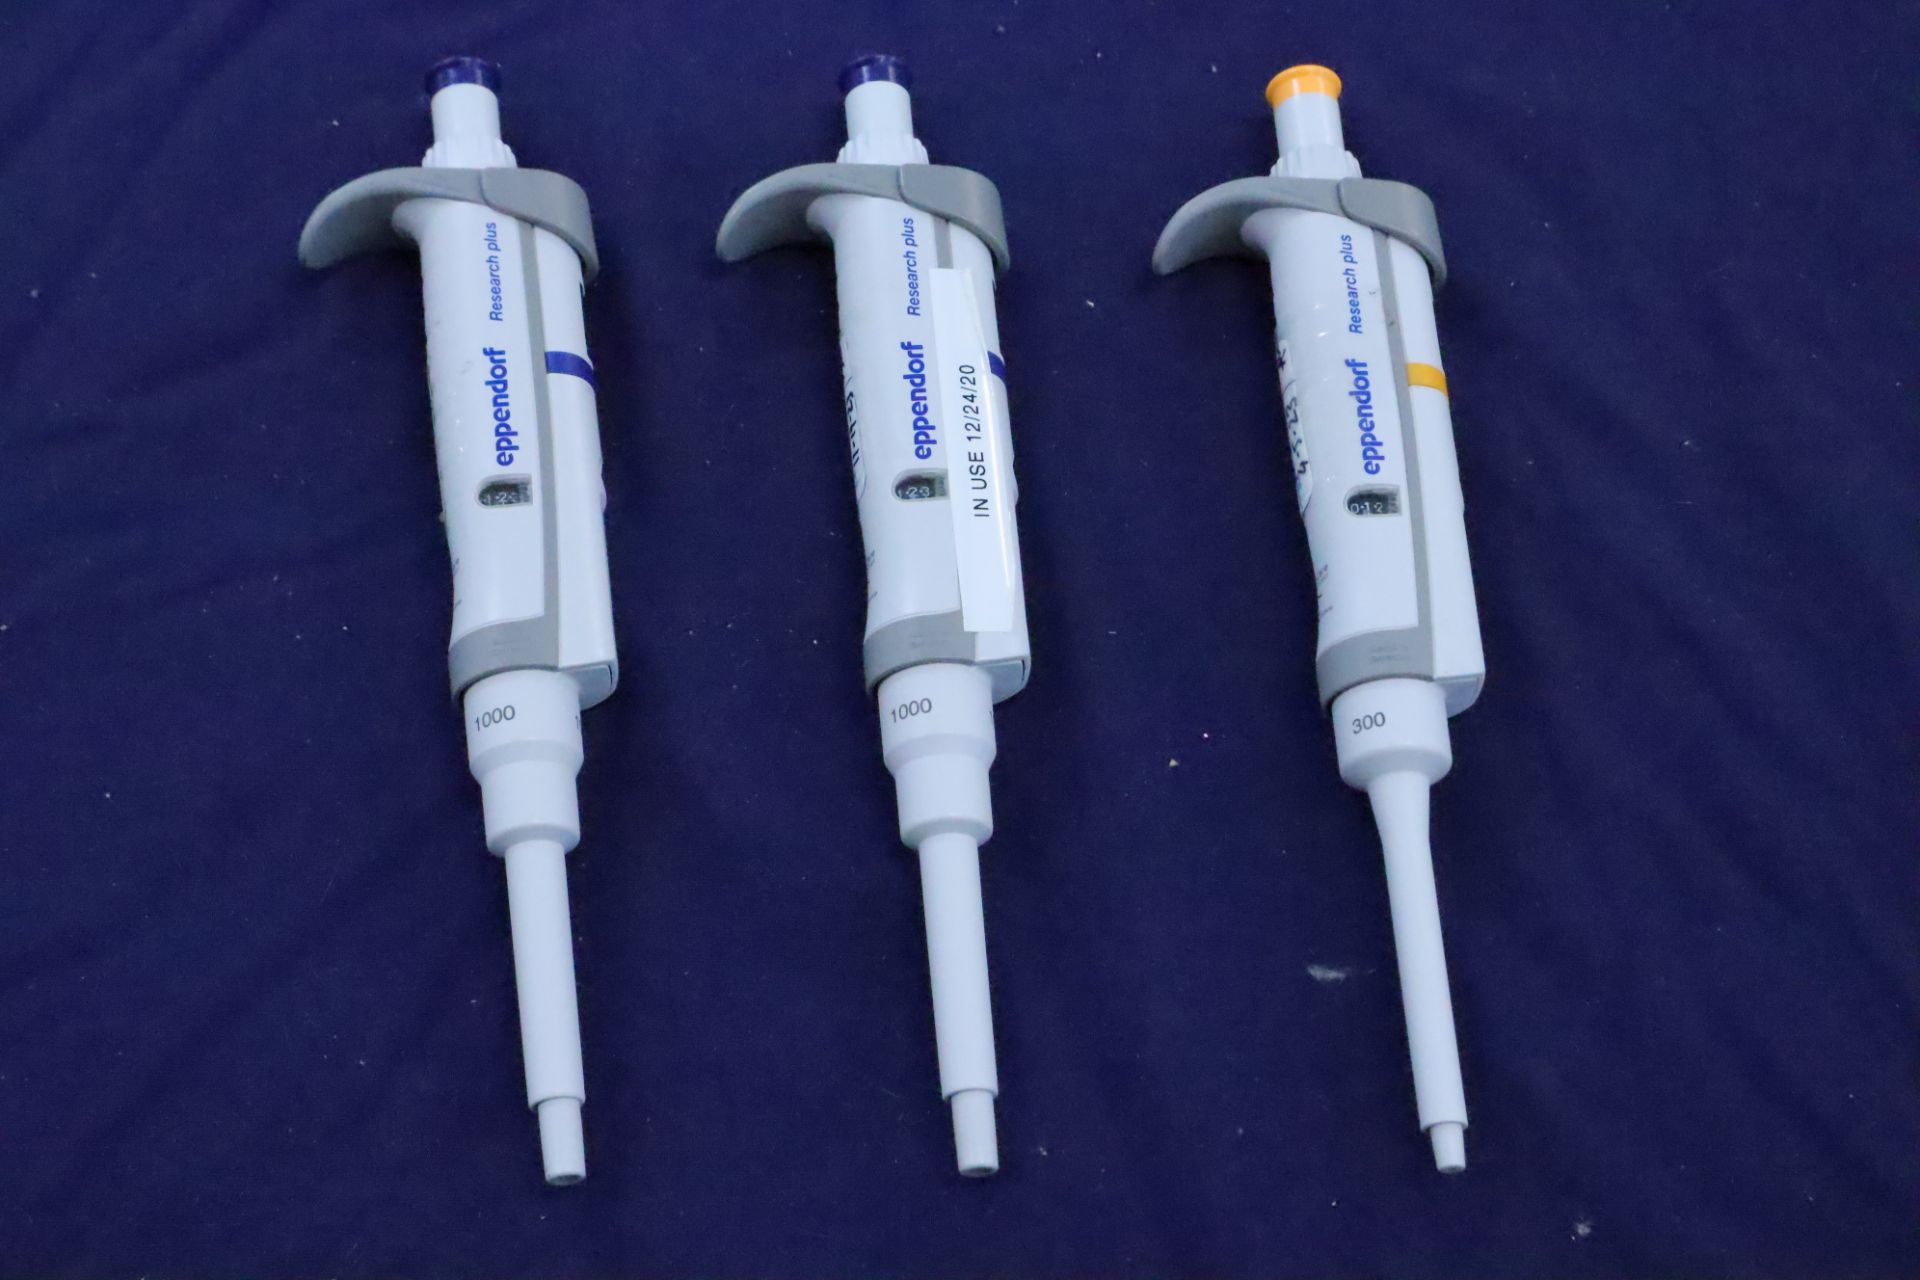 Eppendorf Research Plus Adjustable Volume Pipette (Qty 3)